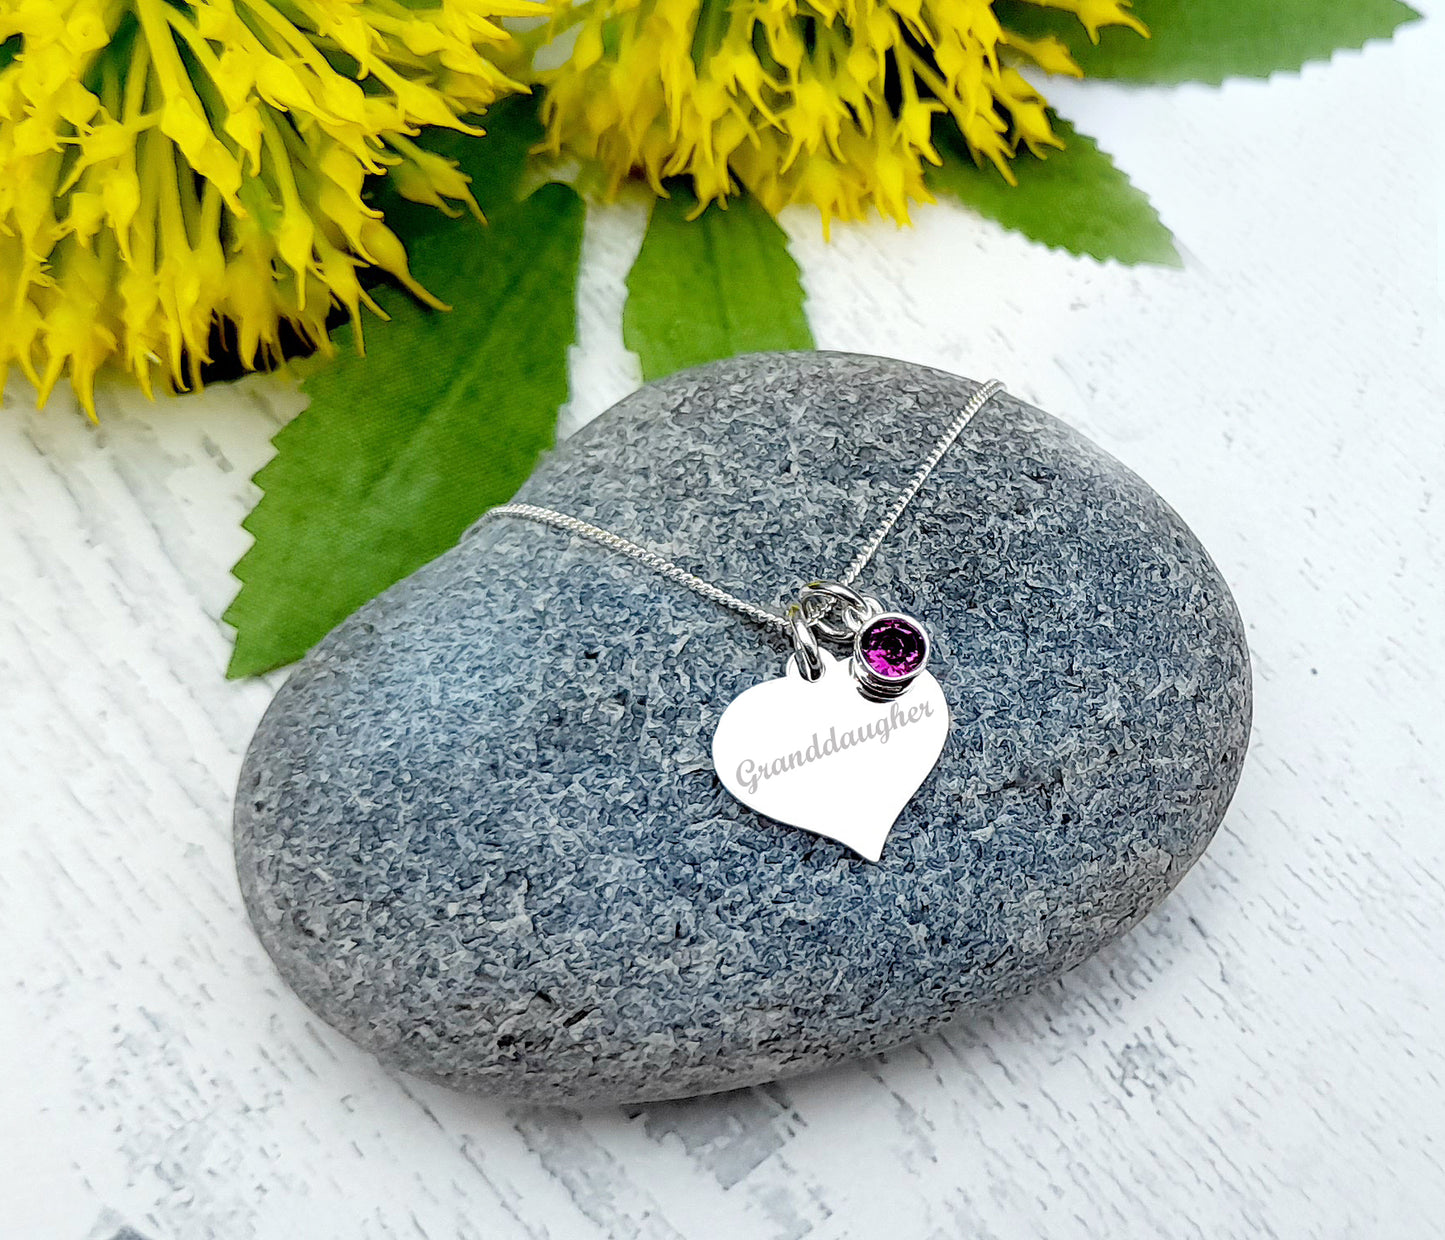 Granddaughter Gift, Engraved Heart Birthstone Necklace 925 Sterling Silver, Personalised Necklace, Message Jewellery